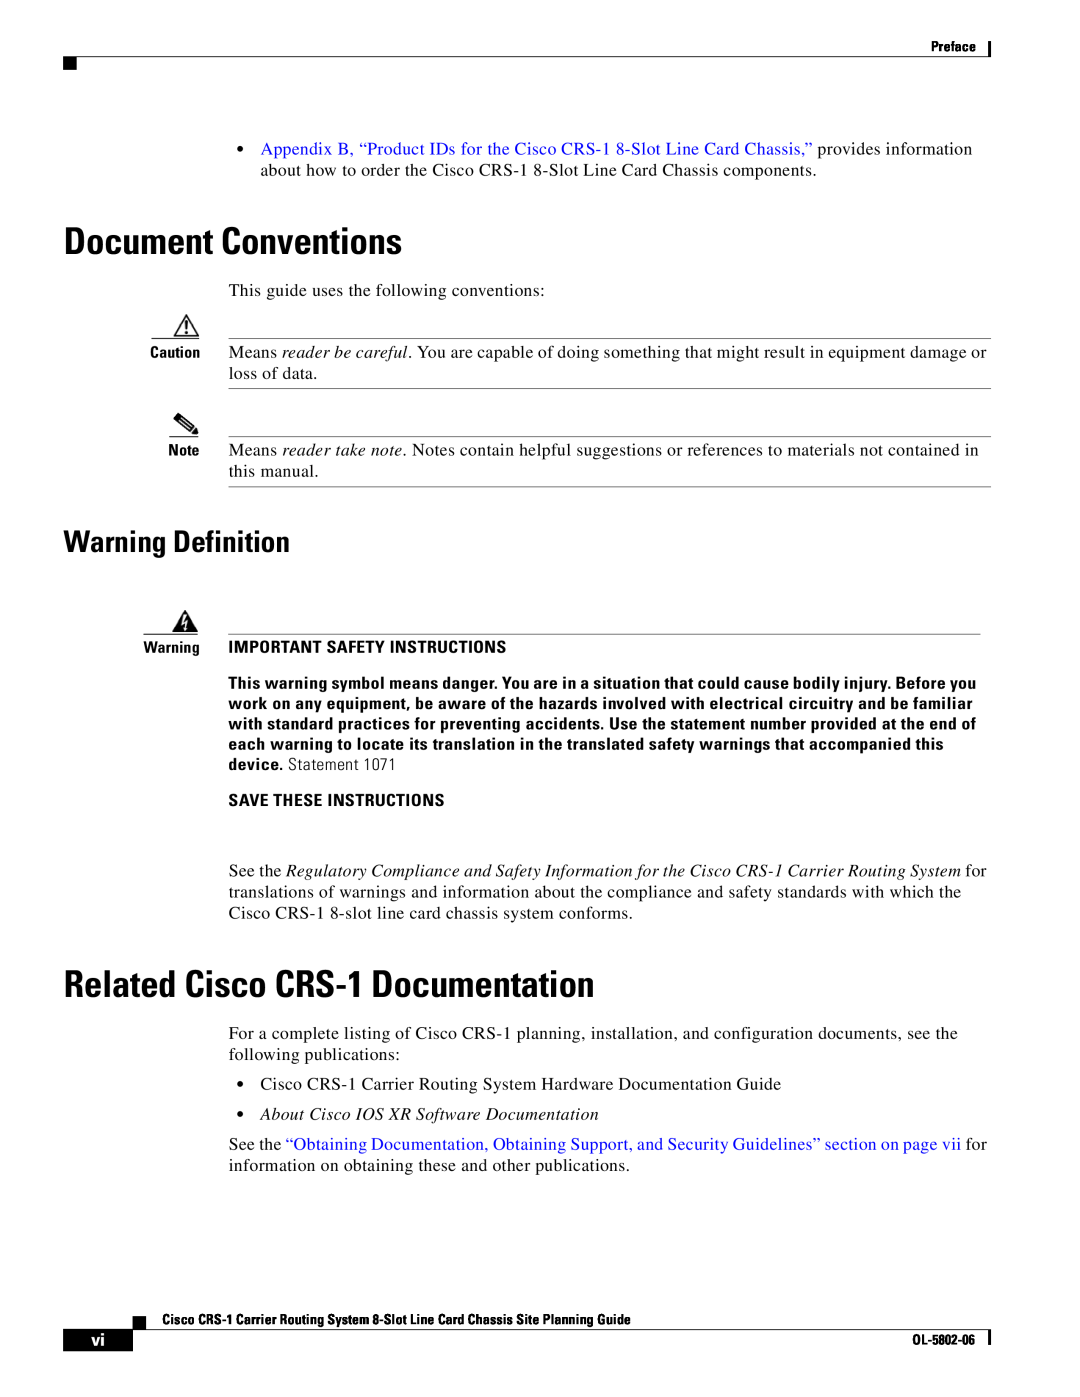 Cisco Systems Document Conventions, Related Cisco CRS-1 Documentation, Warning Definition, Save These Instructions 